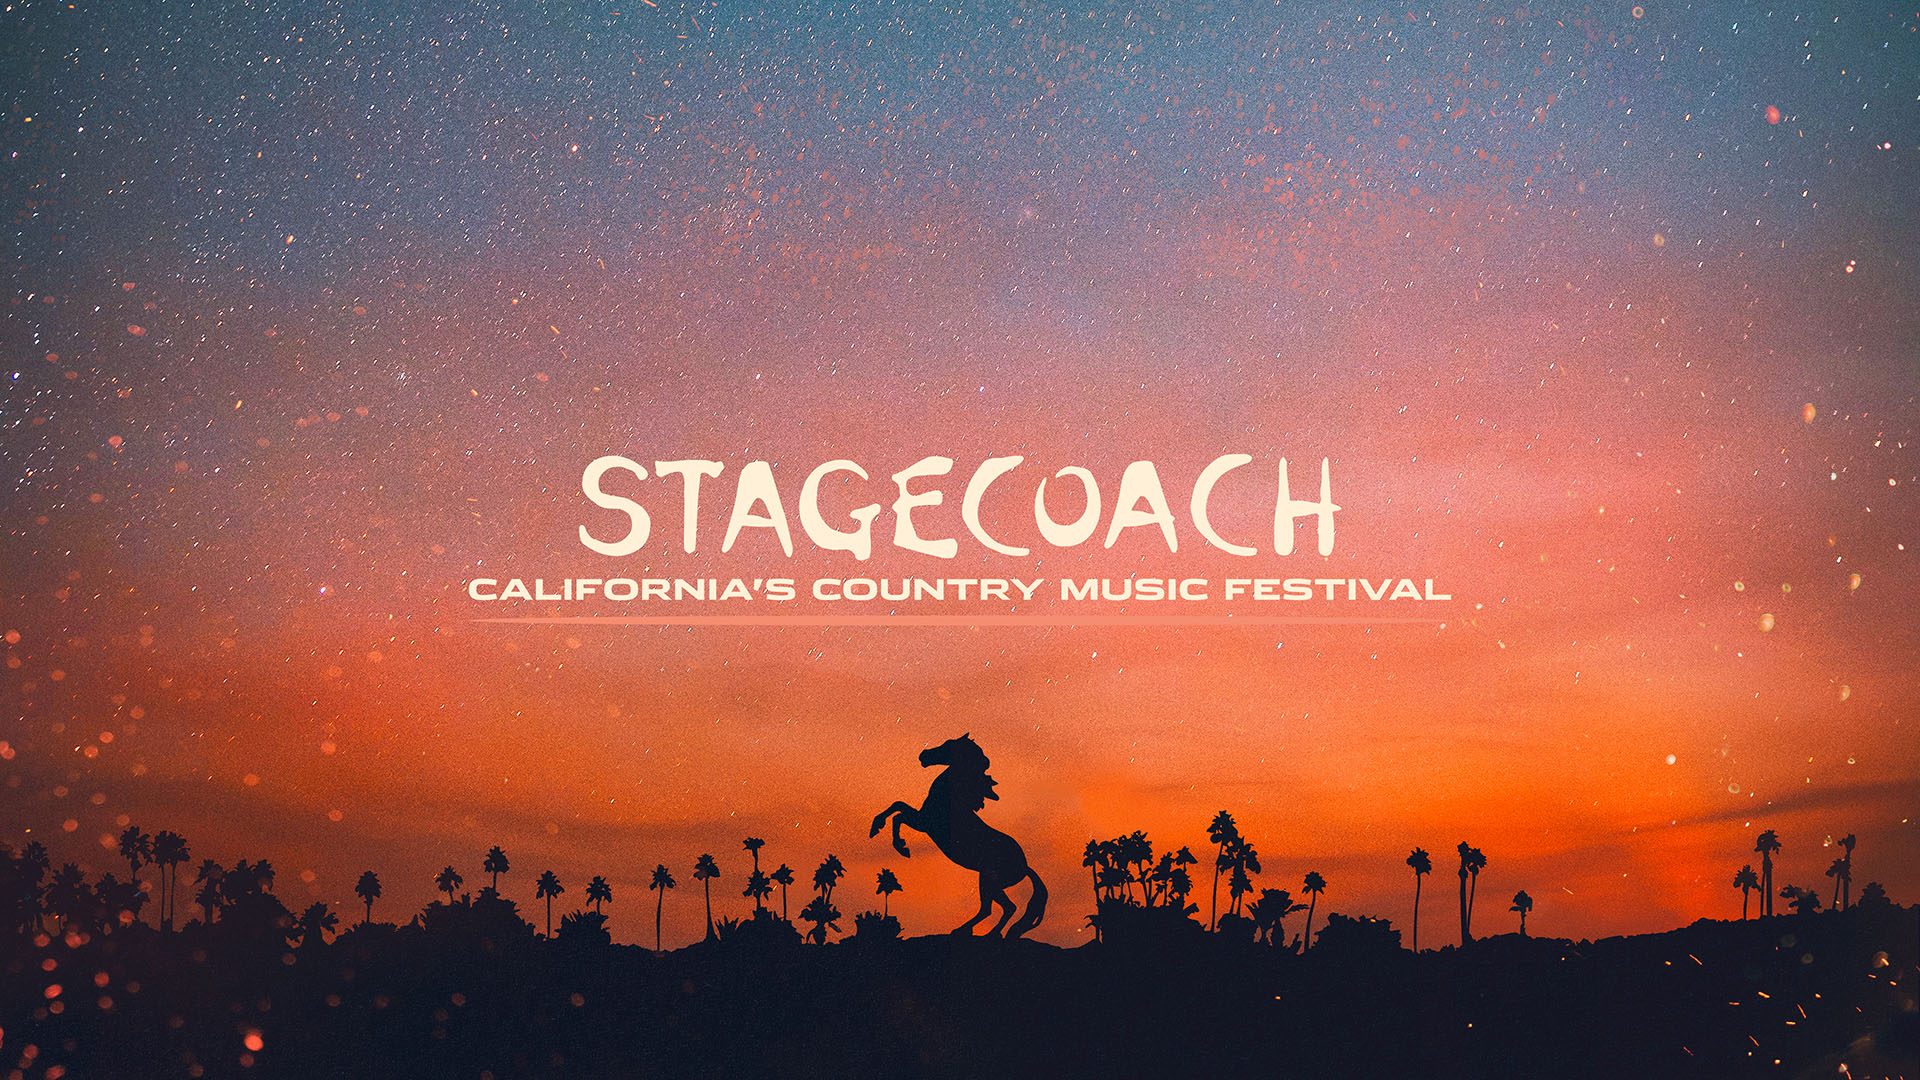 Stagecoach Festival on SiriusXM's The Highway channel